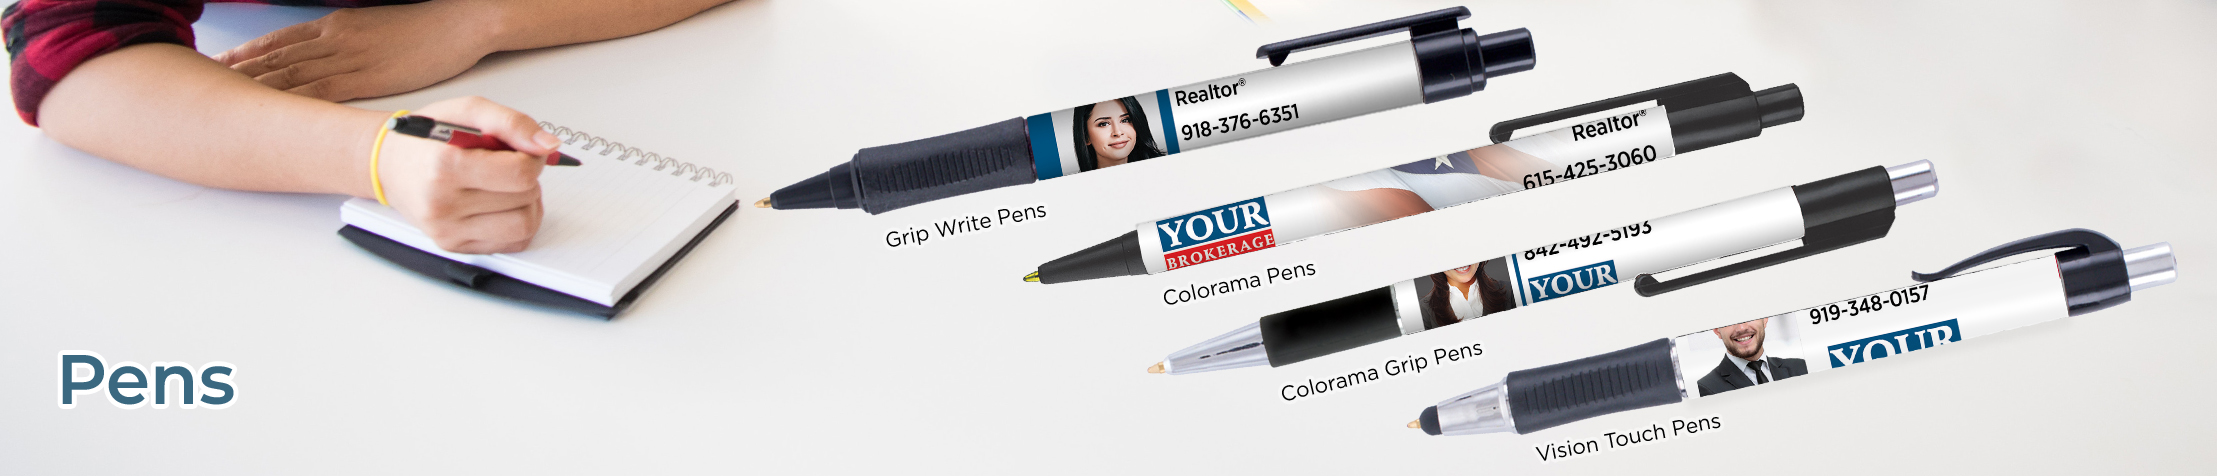 Counselor Realty Real Estate Pens - Counselor Realty  personalized realtor promotional products | BestPrintBuy.com